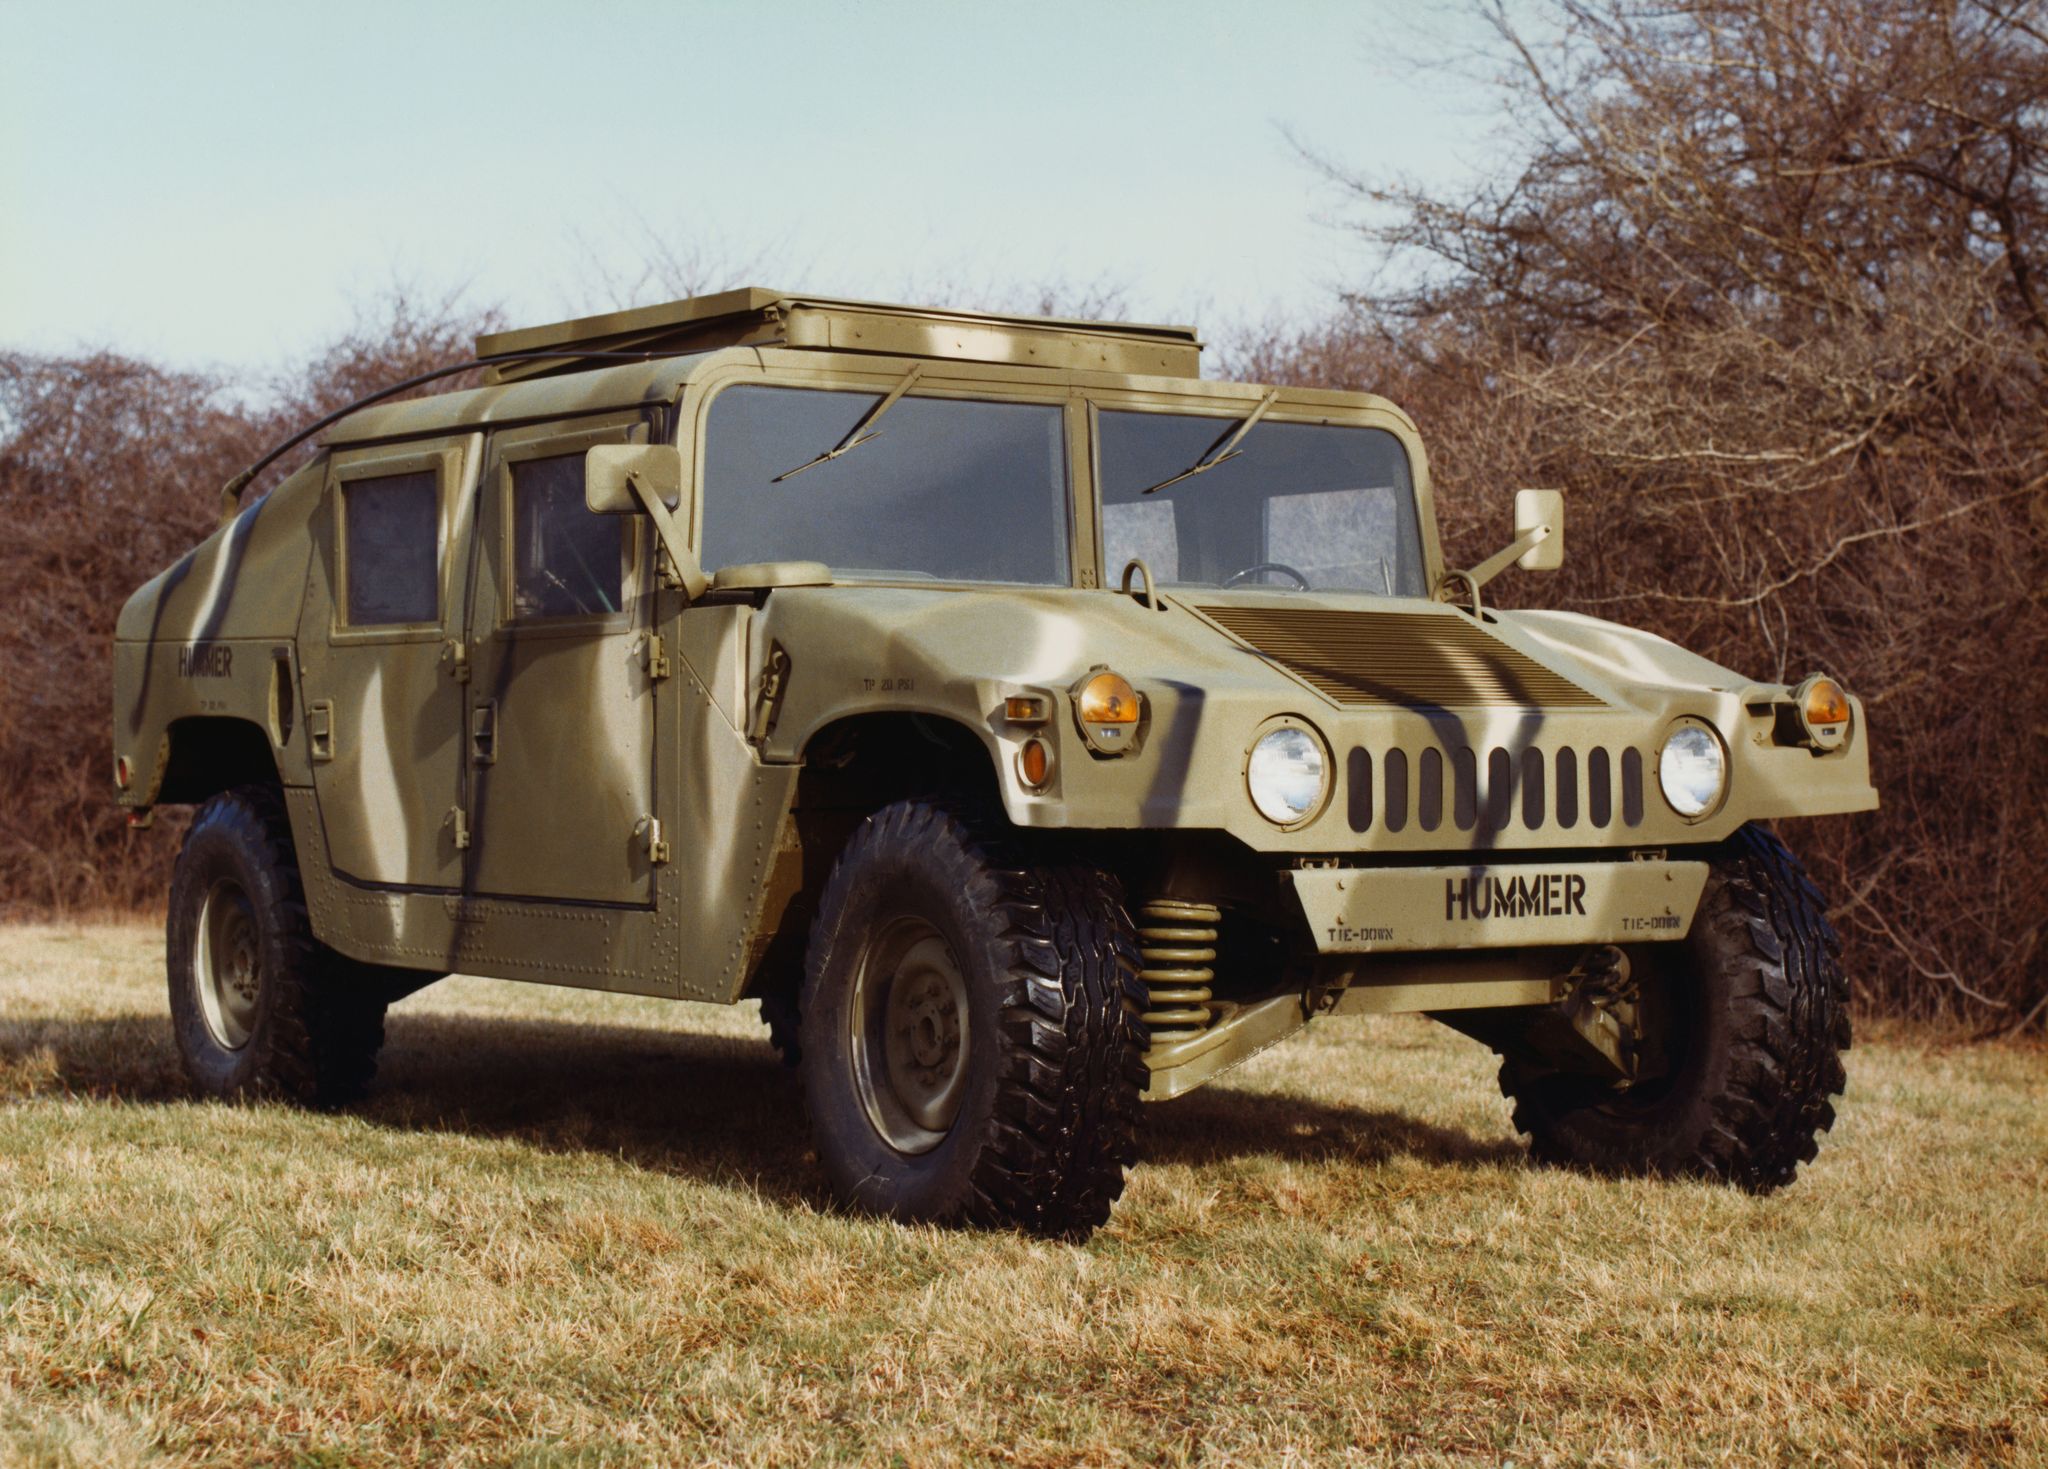 original caption detroit, michigan am general corporation, a subsidiary of american motors corporation has been awarded a 12 billion contract by the us army march 22th, to build a low slung, diesel powered 1 14 ton tactical vehicle called the hummer the new all terrain vehicle, short for high mobility, multi purpose wheeled vehicle, will be assembled near south bend, indiana the contract is estimated to create 800 jobs in the first year and up to 1,400 over its five year life the hummer will be the successor to the jeep